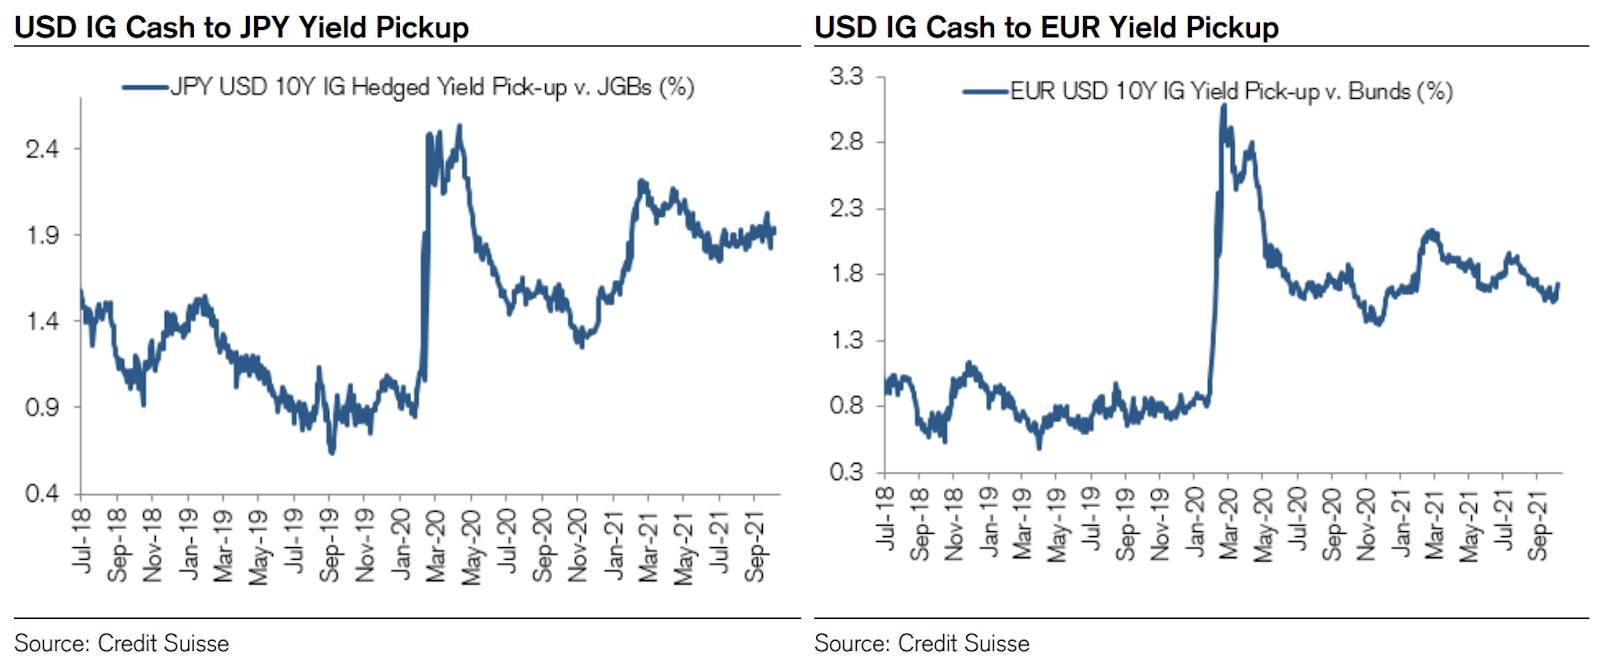 Yield Pickup On USD Investment Grade vs 10Y Bunds And JGBs | Source: Credit Suisse